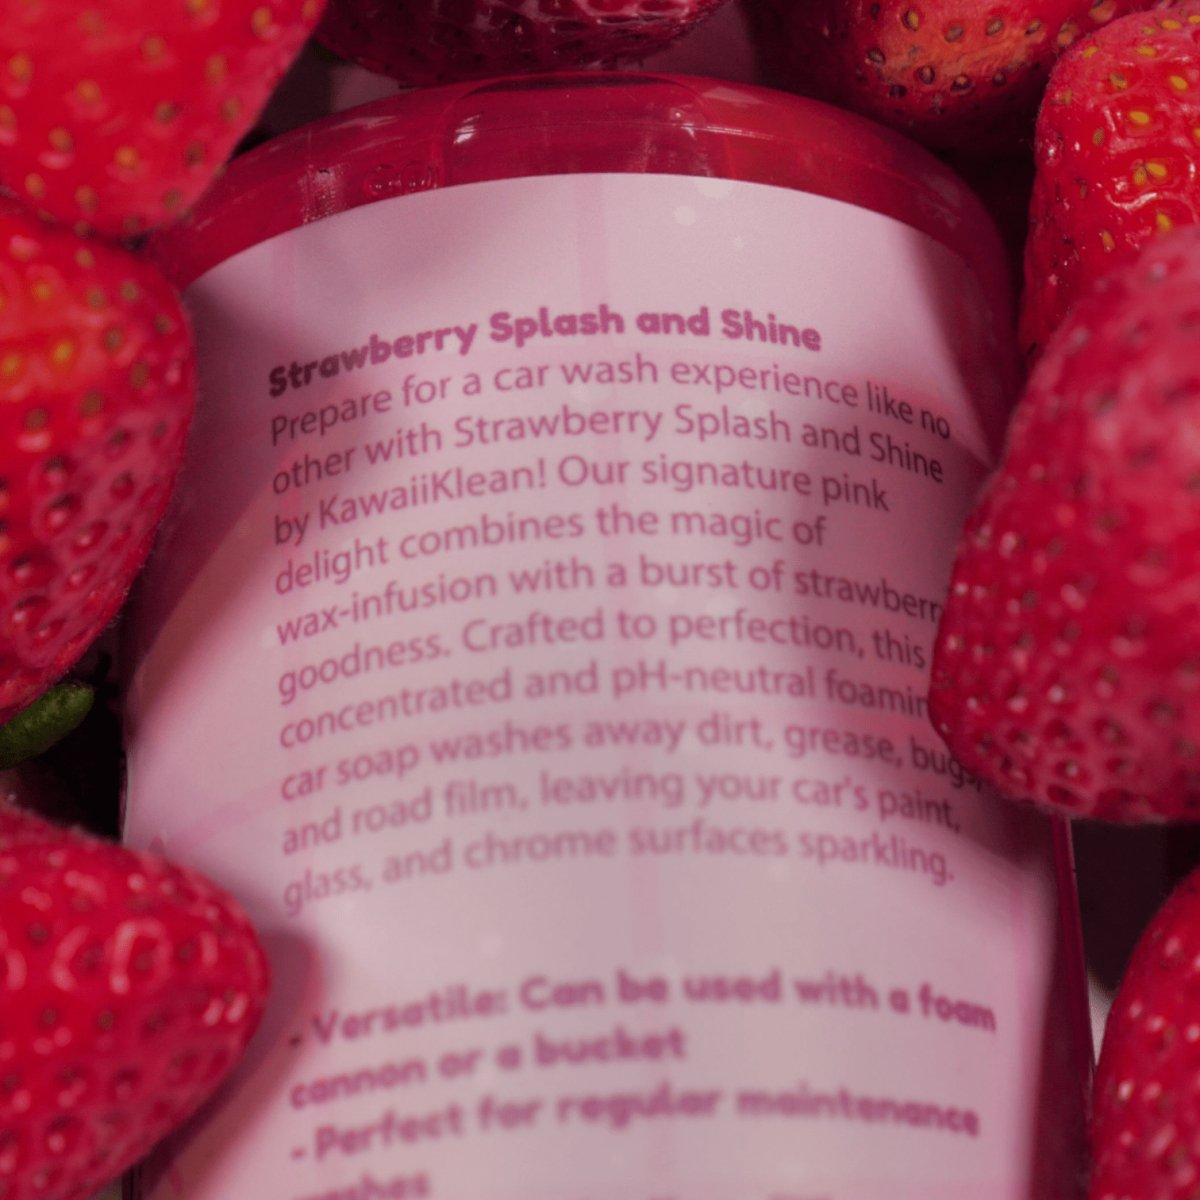 16 oz bottle of 'Strawberry Splash and Shine' pink car soap, detailed description visible, nestled among fresh strawberries, highlighting the soap's natural strawberry essence and vibrant cleaning power.